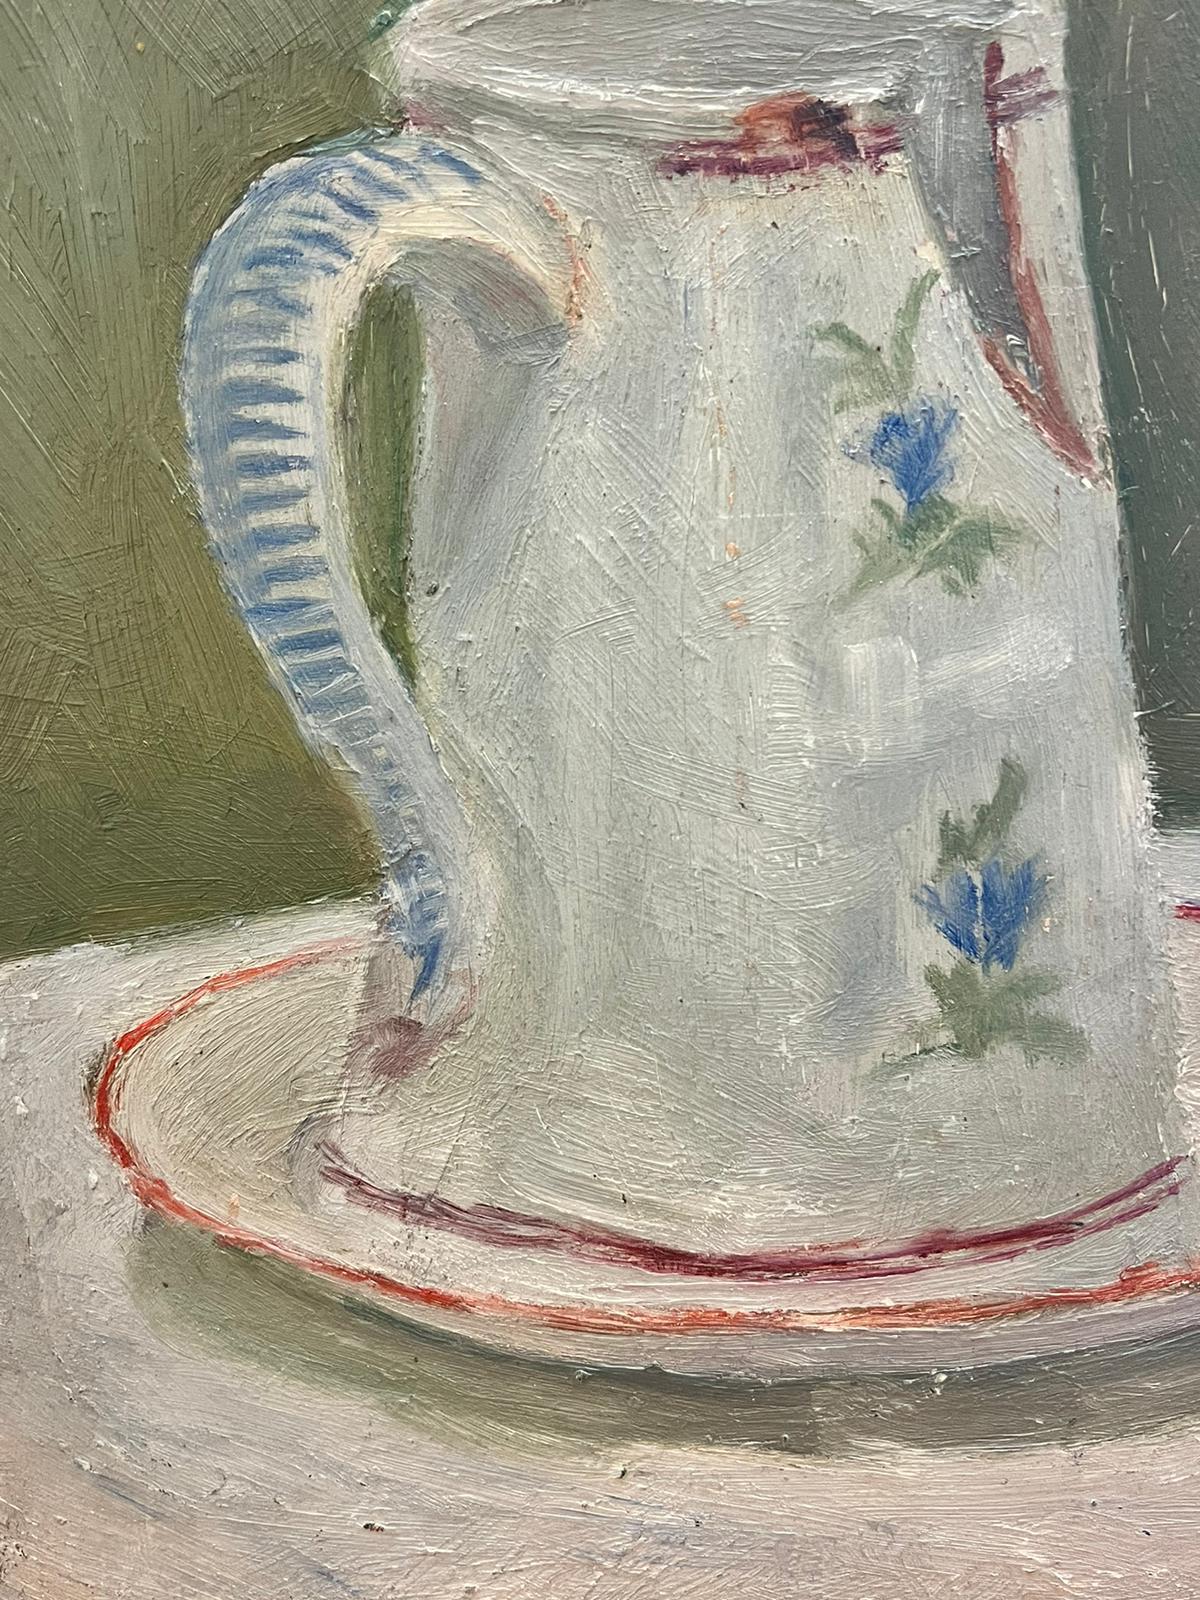 Artist/ School: French School, late 19th century 

Title: Still life of a jug and plate within an interior, beautifully executed work. 

Medium: oil on board

Size: 14 x 10.5 inches

Provenance: private collection, France

Condition: The painting is